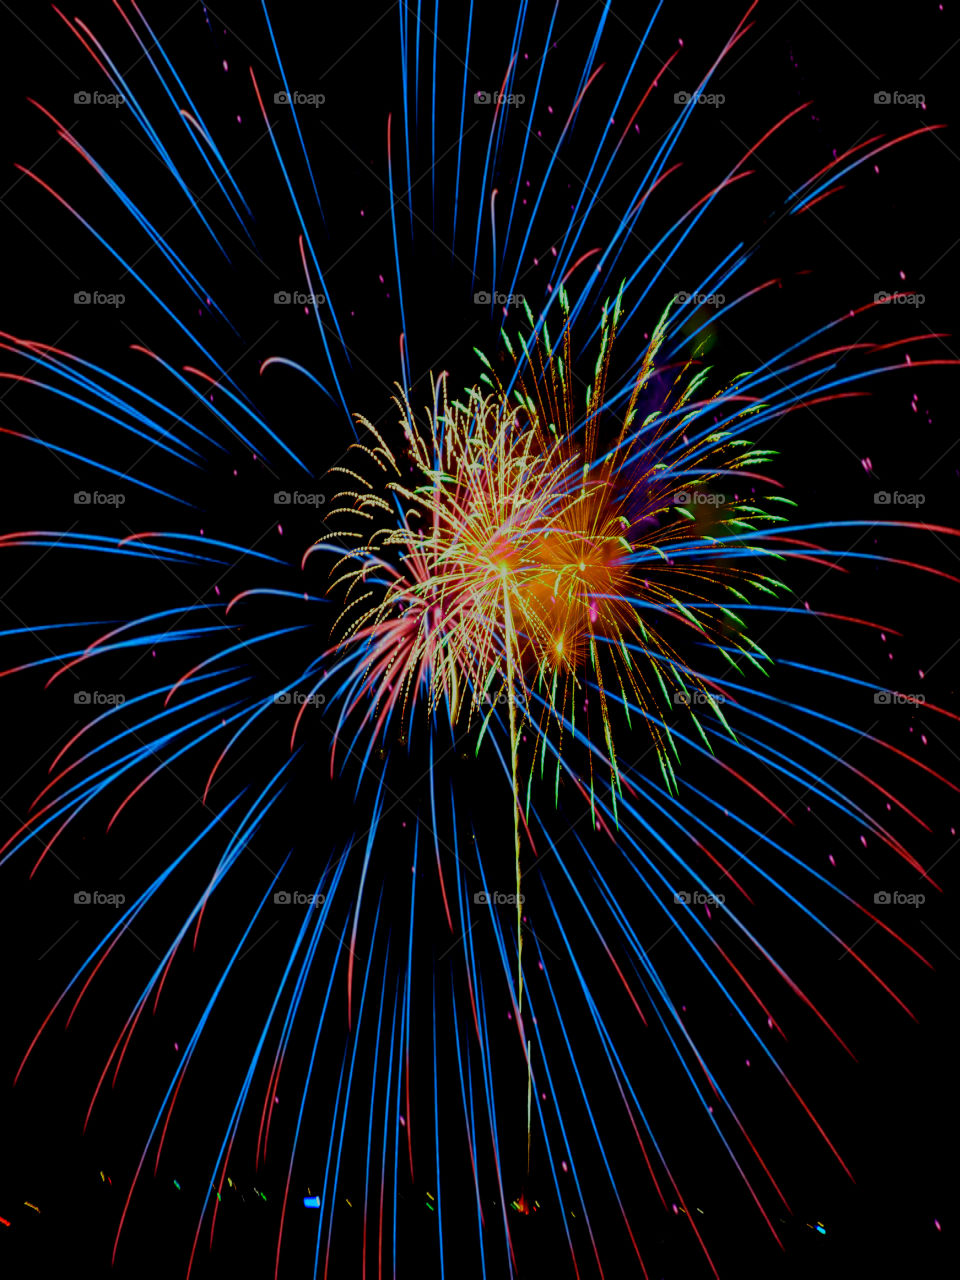 Here, over the Gulf of Mexico, a barrage of missiles designed to explode in a controlled way explode with brilliant red, orange, yellow, green, blue and purple colors! Thousands of people across the United States will be celebrating Independence Day on July 4th by  attending firework displays! 